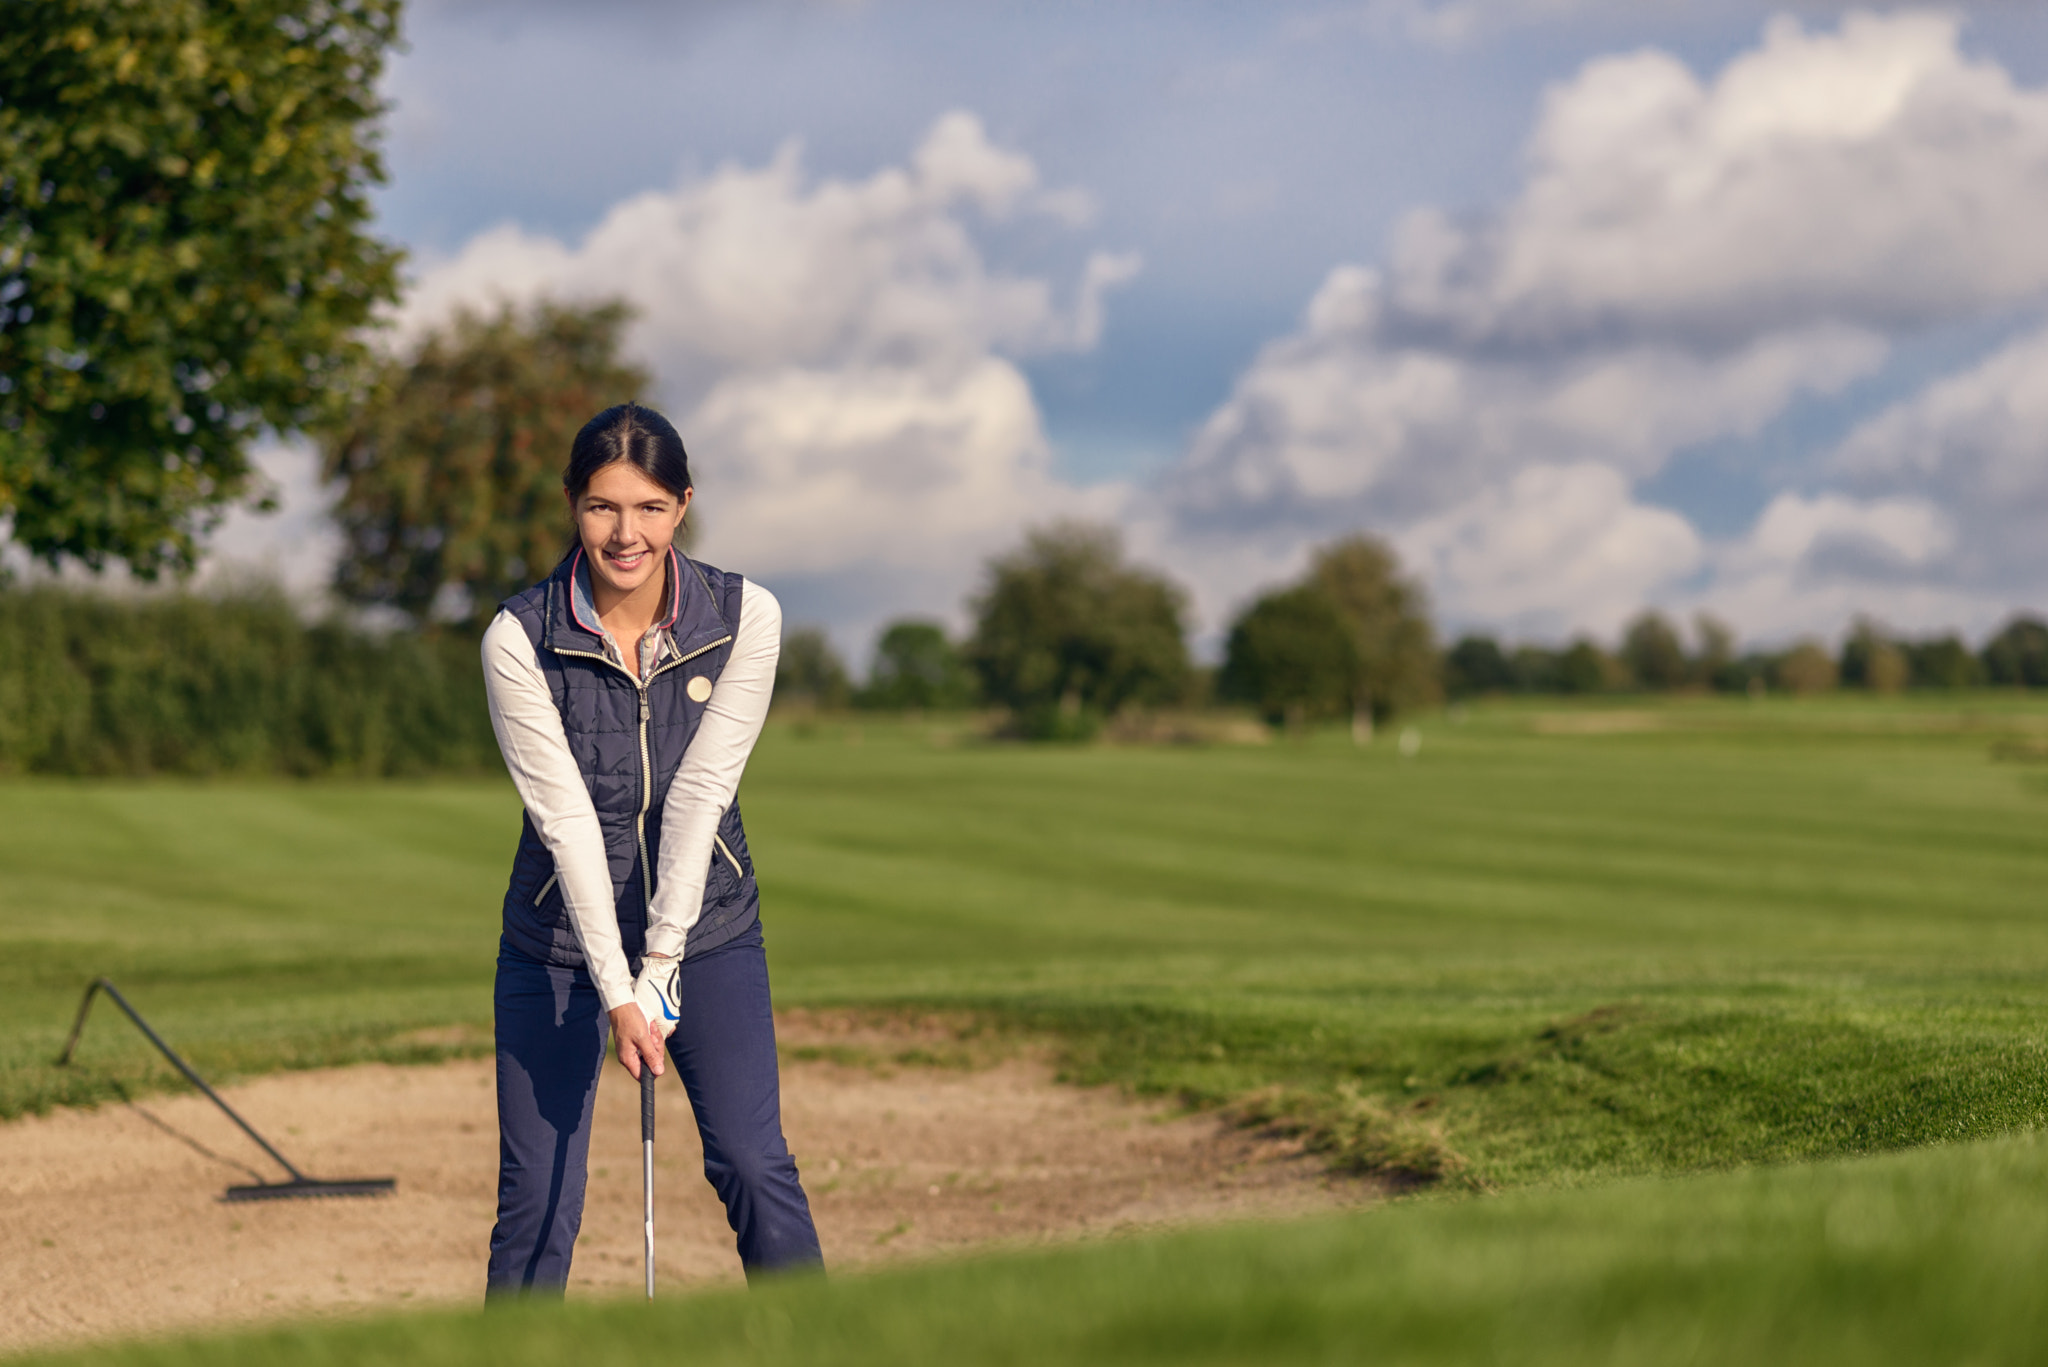 Young woman golfer in a sand bunker